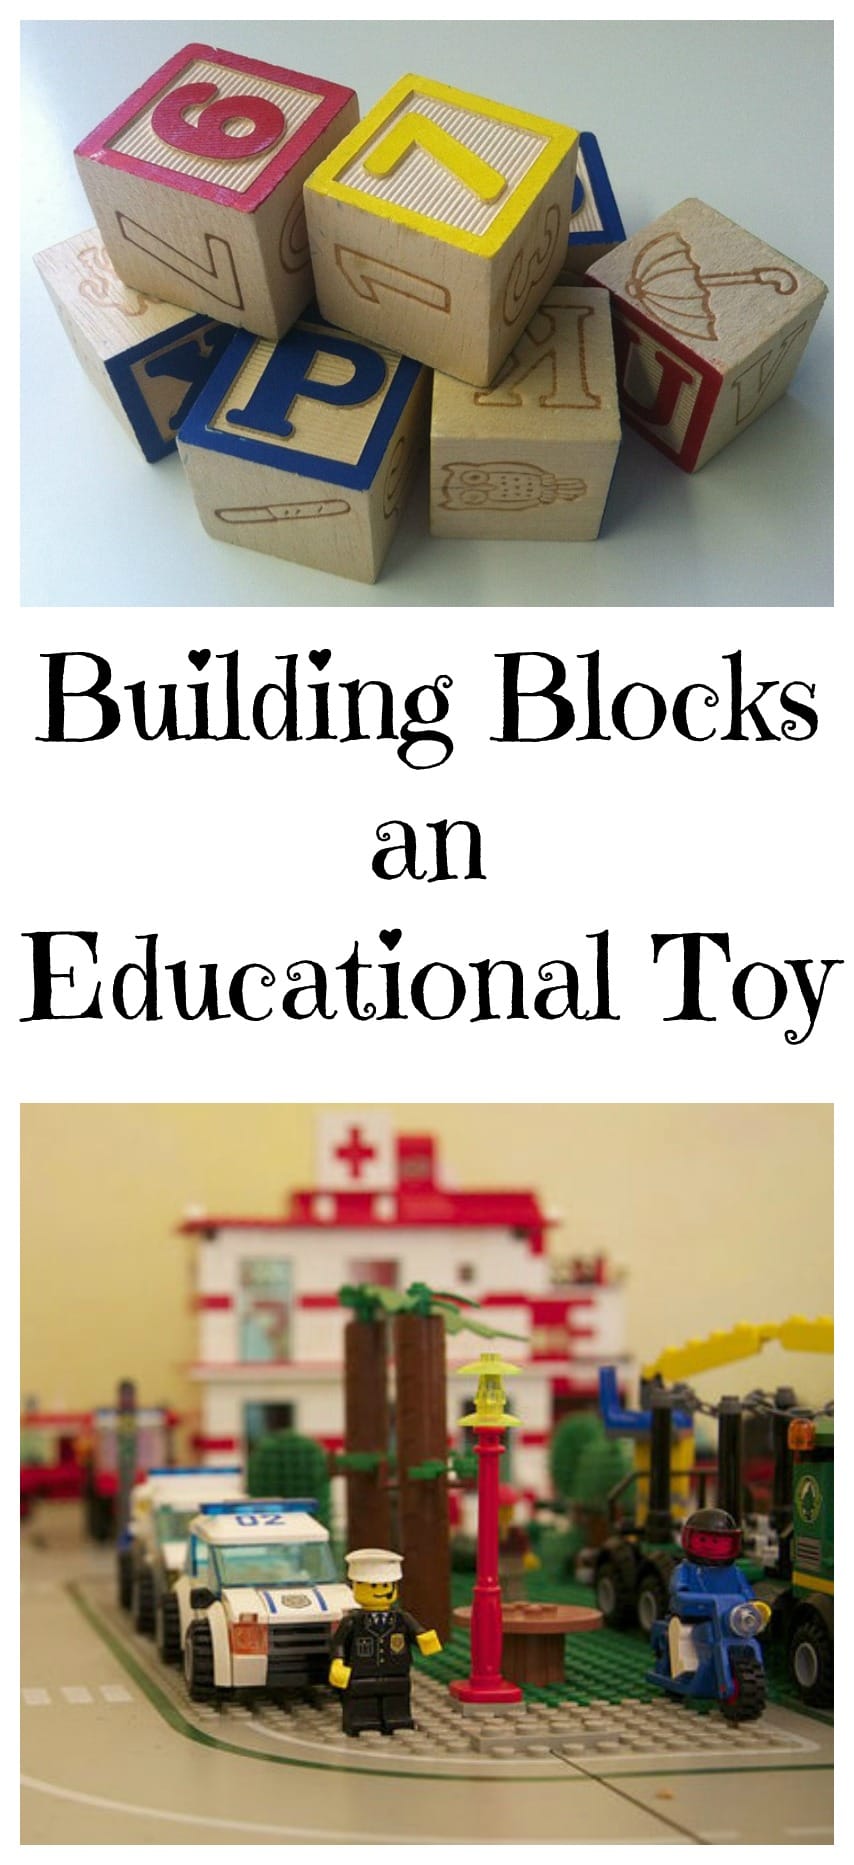 Building Blocks for Kids it's an Educational Game With Huge Learning Benefits 